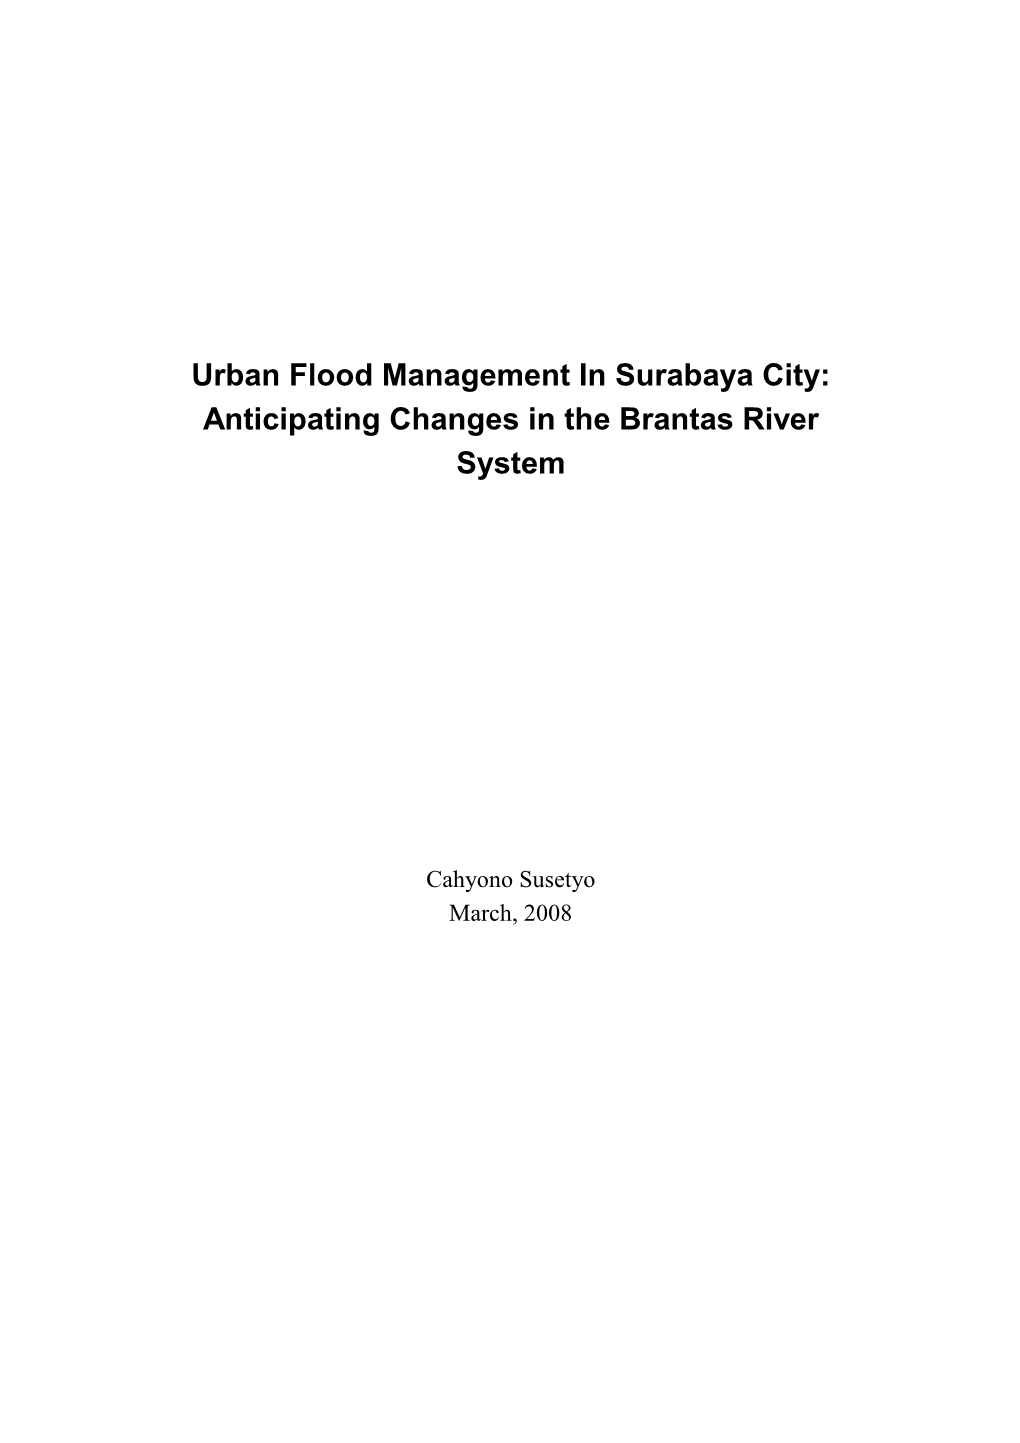 Urban Flood Management in Surabaya City: Anticipating Changes in the Brantas River System